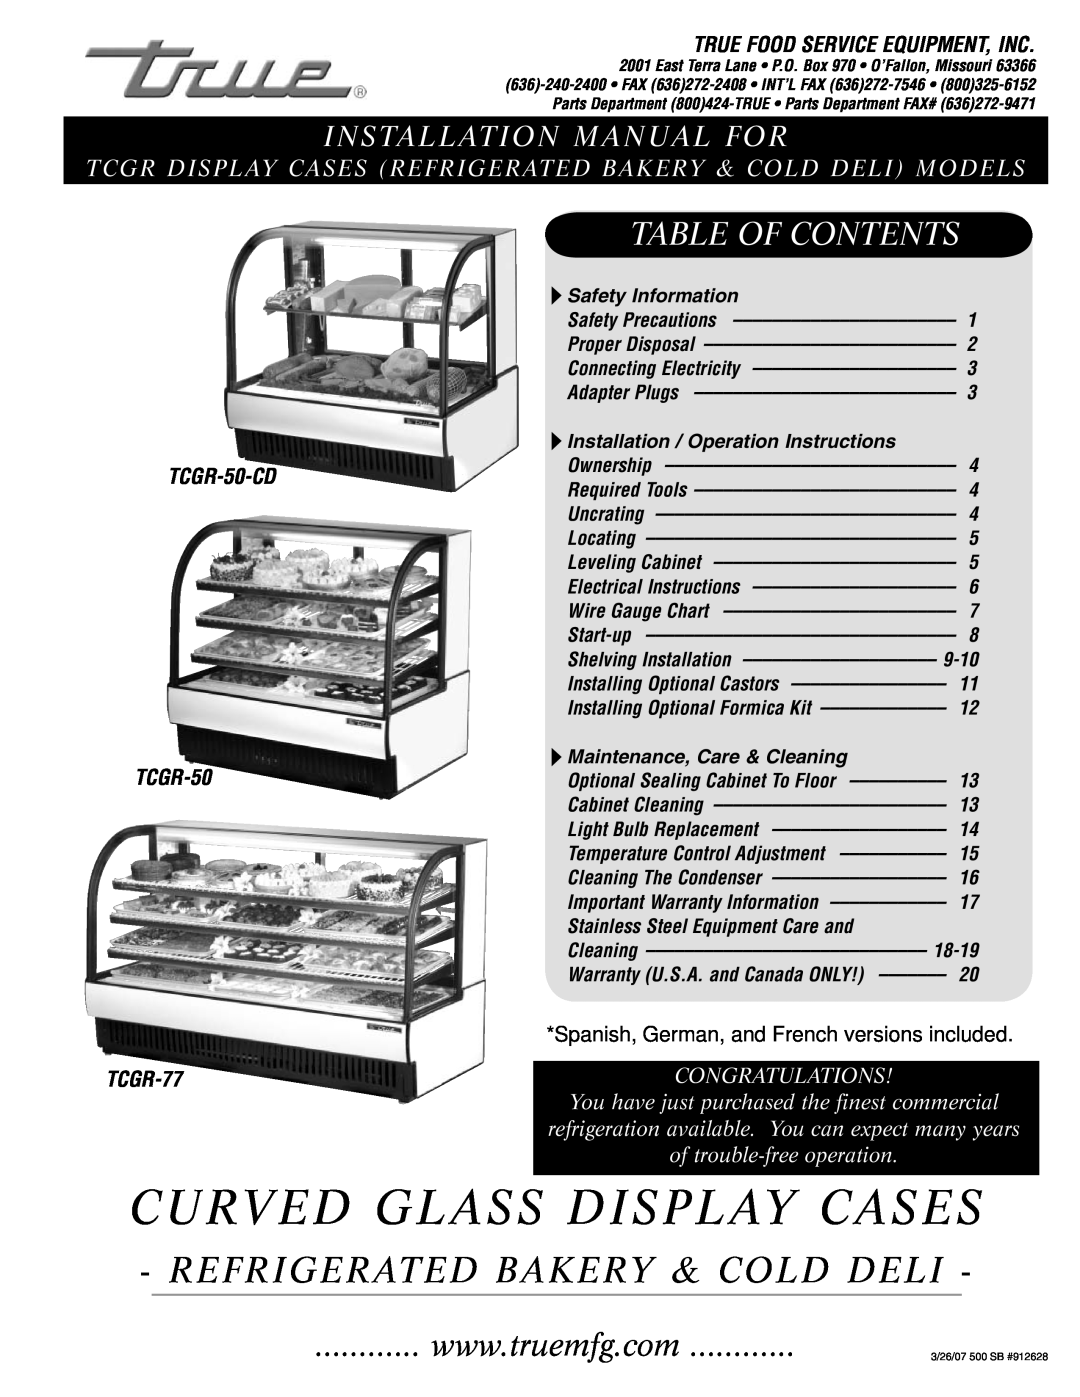 True Manufacturing Company TCGR-77 installation manual Curved Glass Display Cases, Refrigerated Bakery & Cold Deli 